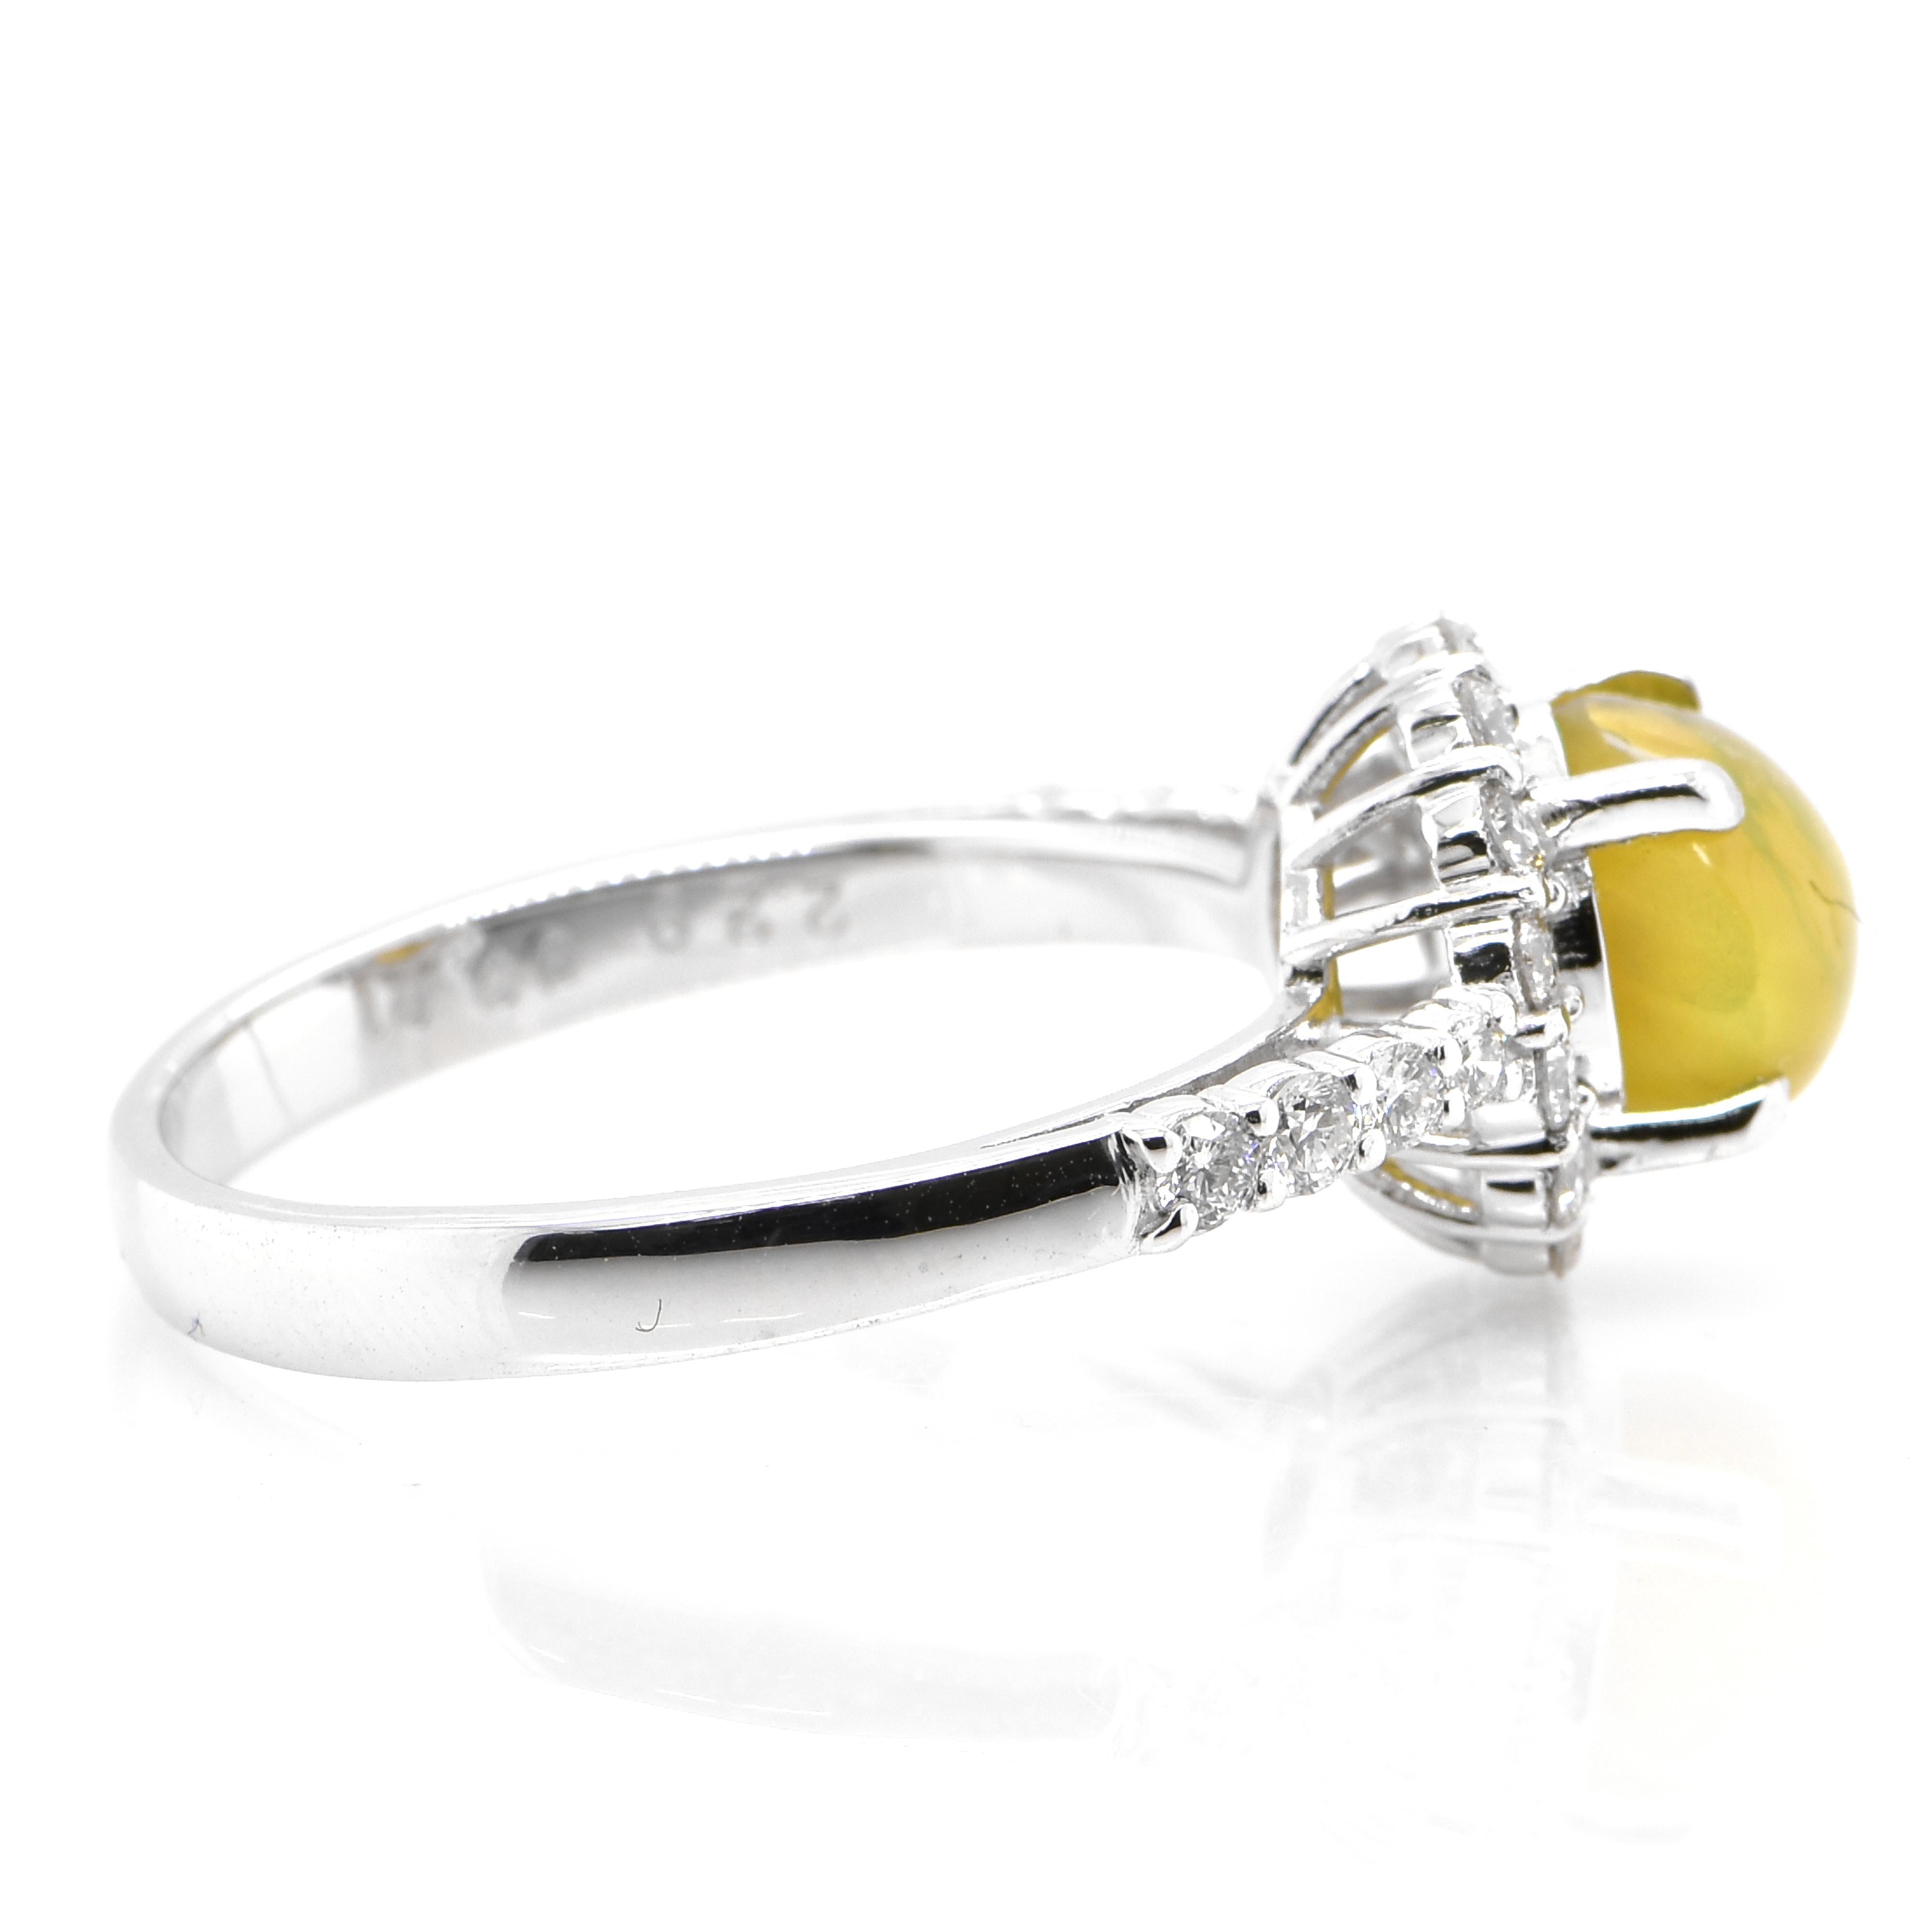 2.29 Carat 'Honey-Color' Cat's Eye Chrysoberyl and Diamond Ring Set in Platinum In New Condition For Sale In Tokyo, JP